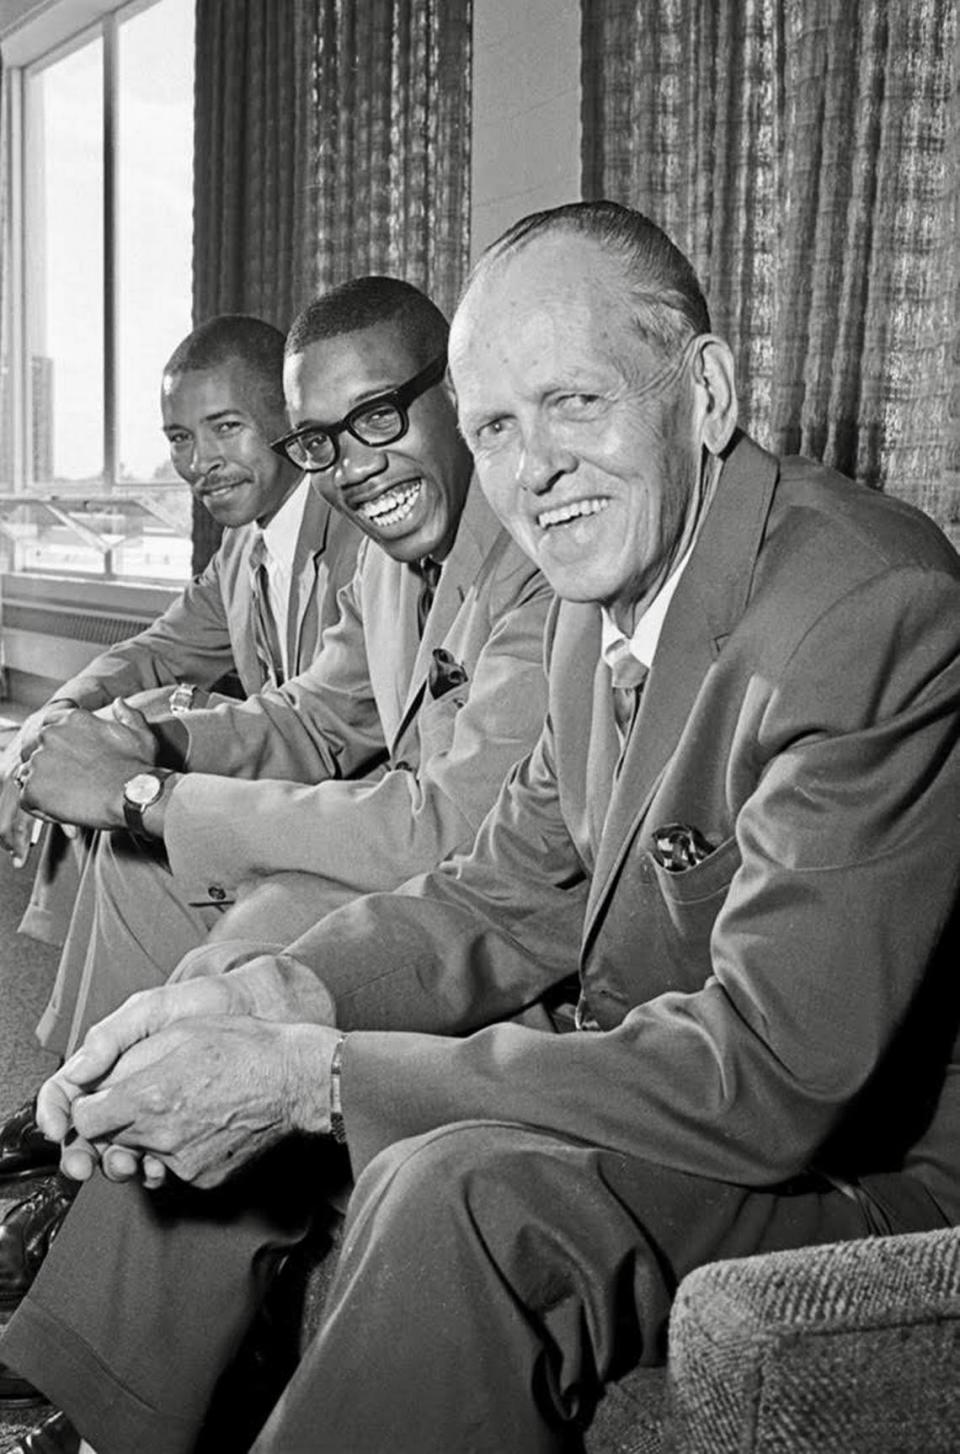 James Cash, center, signed a letter of intent with TCU Basketball Coach Buster Brannon and the I. M. Terrell all-stater became the first to break the color line in Southwest Conference basketball. Cash’s coach, Robert Hughes, is pictured at left.